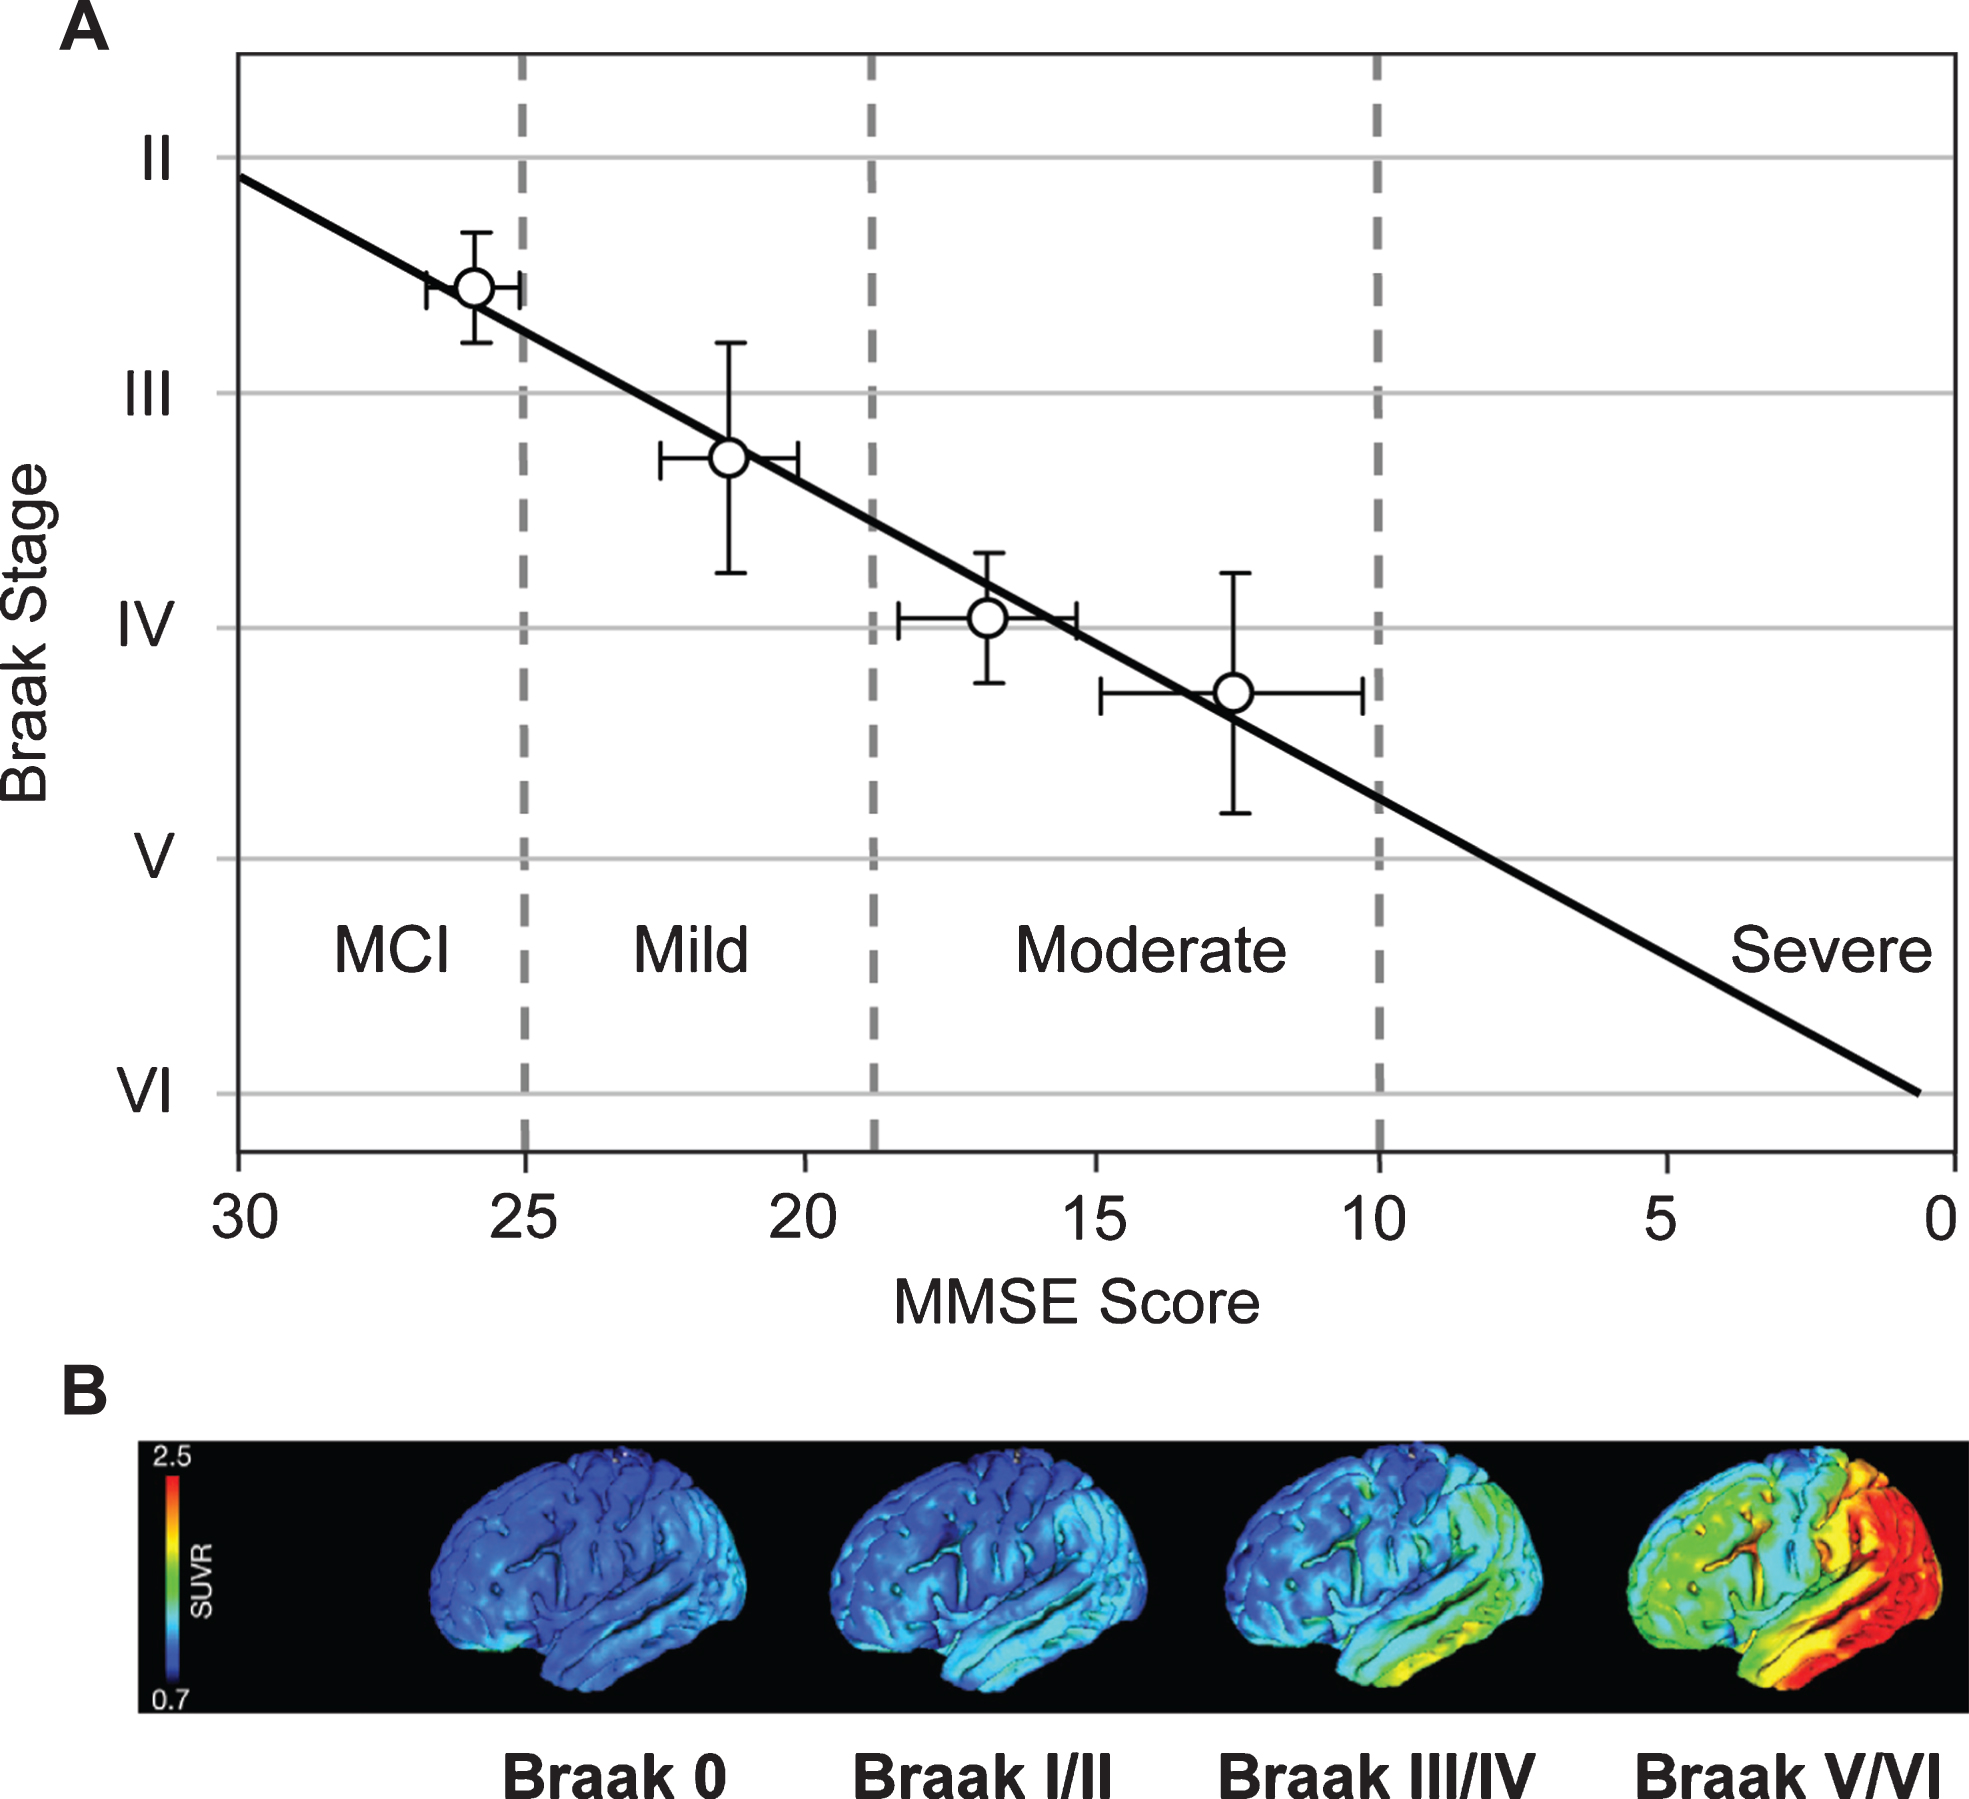 Correlation of Braak staging with cognitive decline and pathology. Cognitive decline is measured by MMSE determined 12–24 months antemortem and tau pathology measured in vivo using 18F-AV-1451 (tau) PET. Source: (A) From Wischik et al., Biochem Pharmacol 88, 529-539, 2014; (B) From Schöll et al., Neuron 89, 971-982, 2016, with permission of Elsevier.